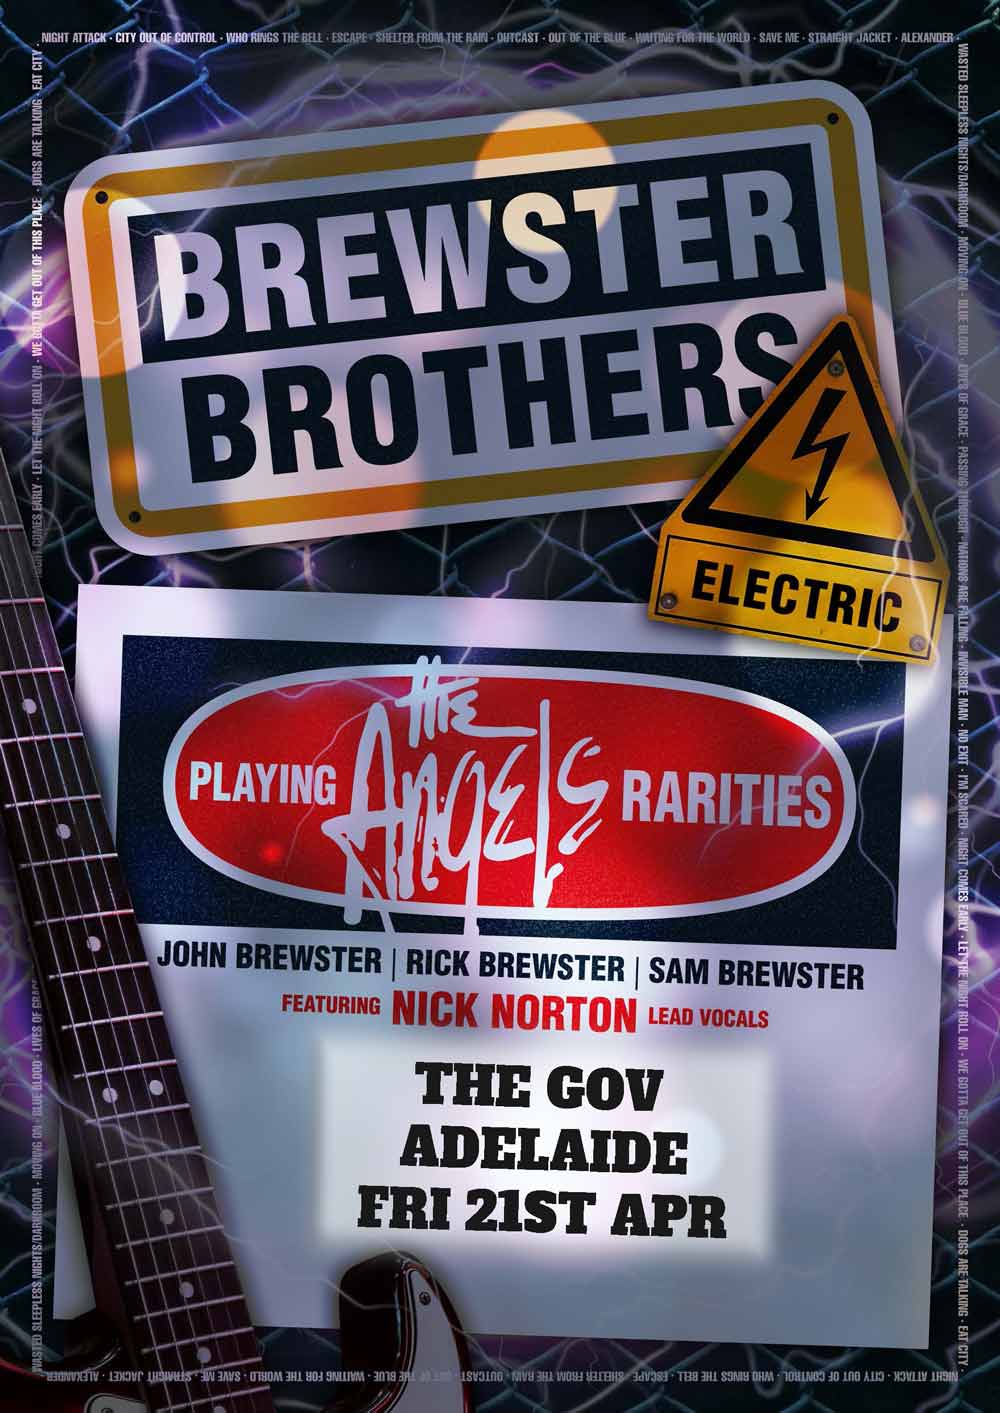 Brewster Brothers: Electric - Playing Angels Rarities